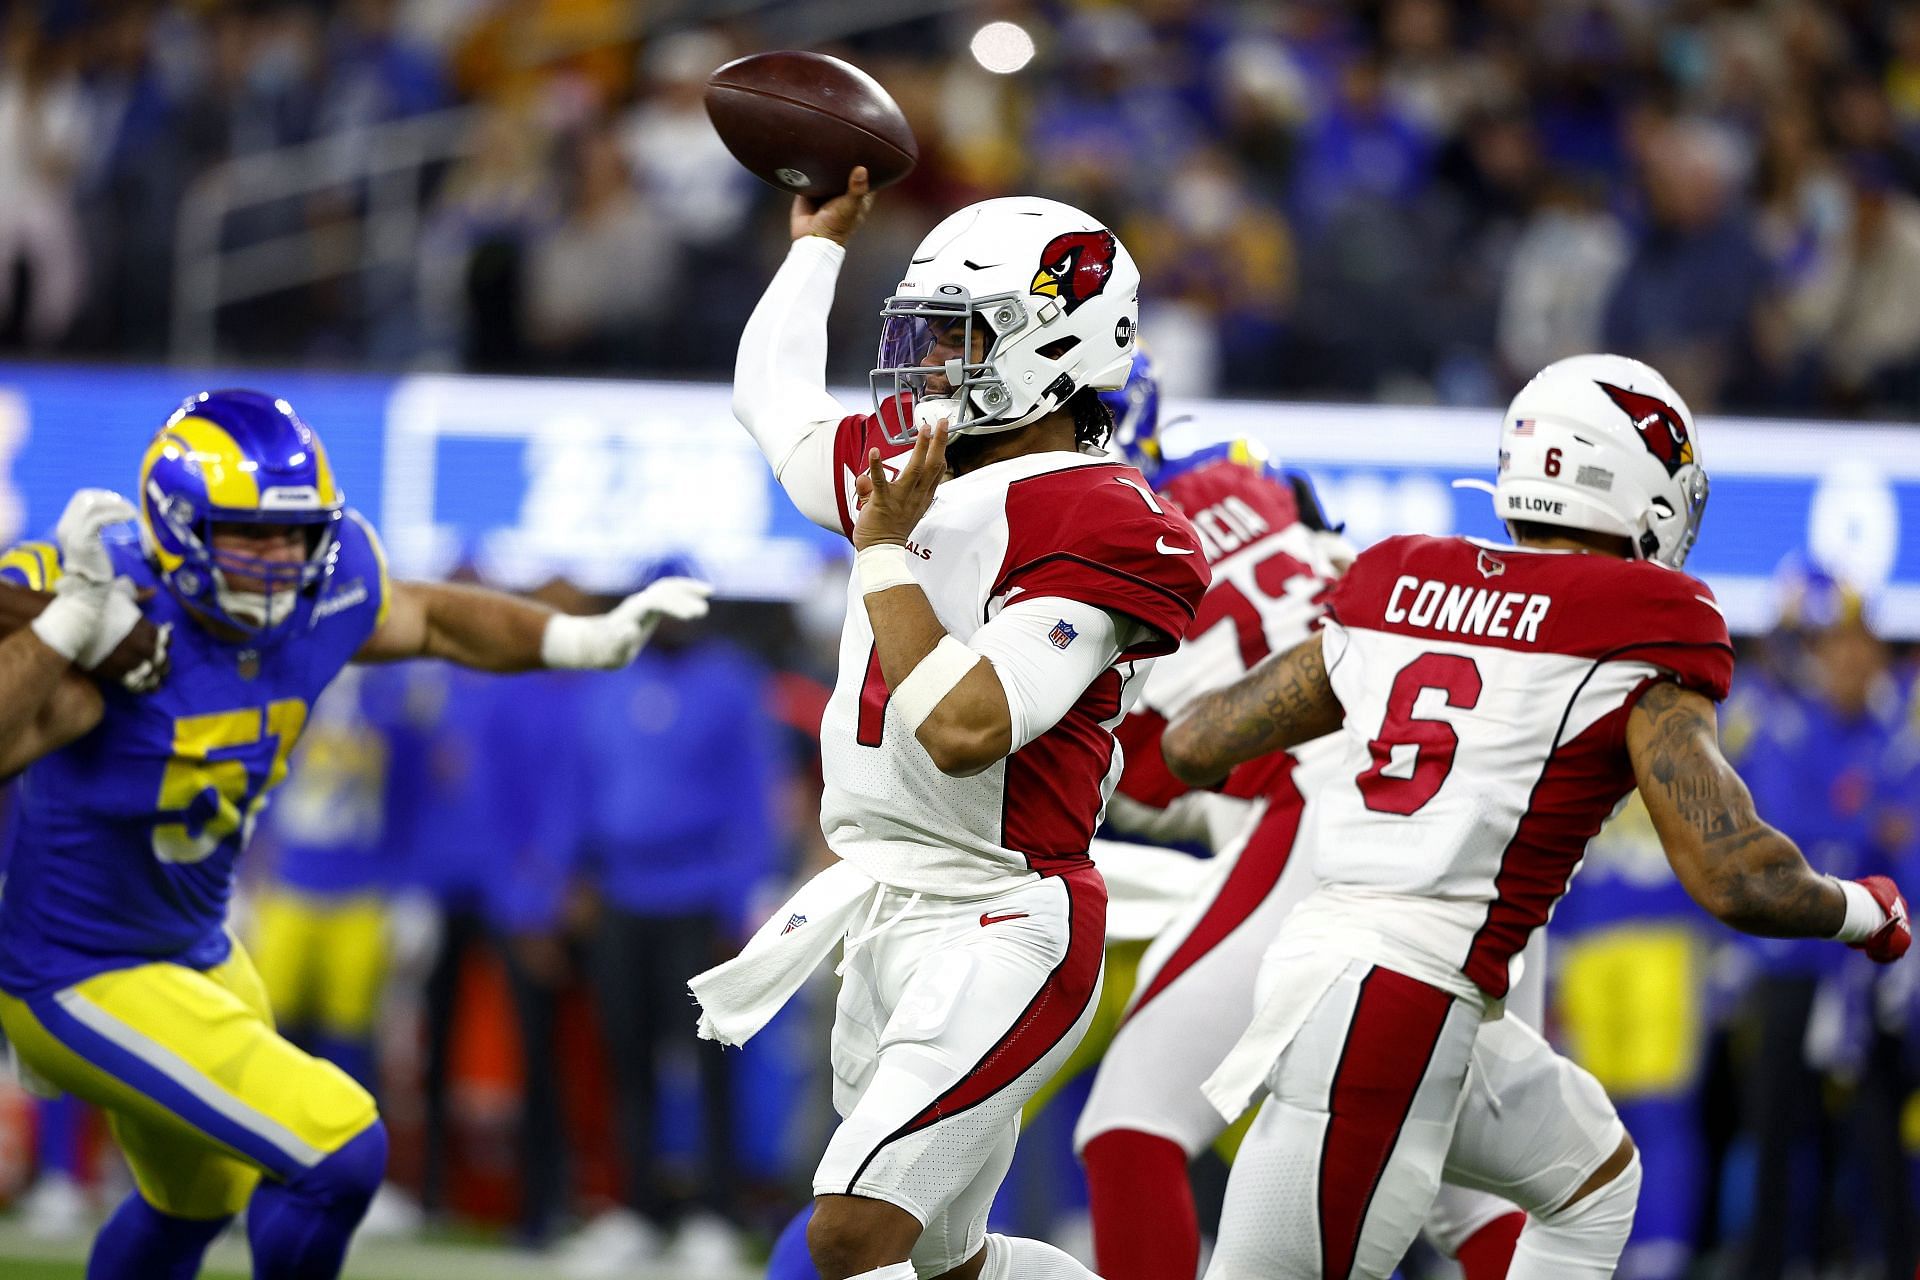 Kyler Murray will have to prove himself soon if he wants to stay QB1 in Arizona